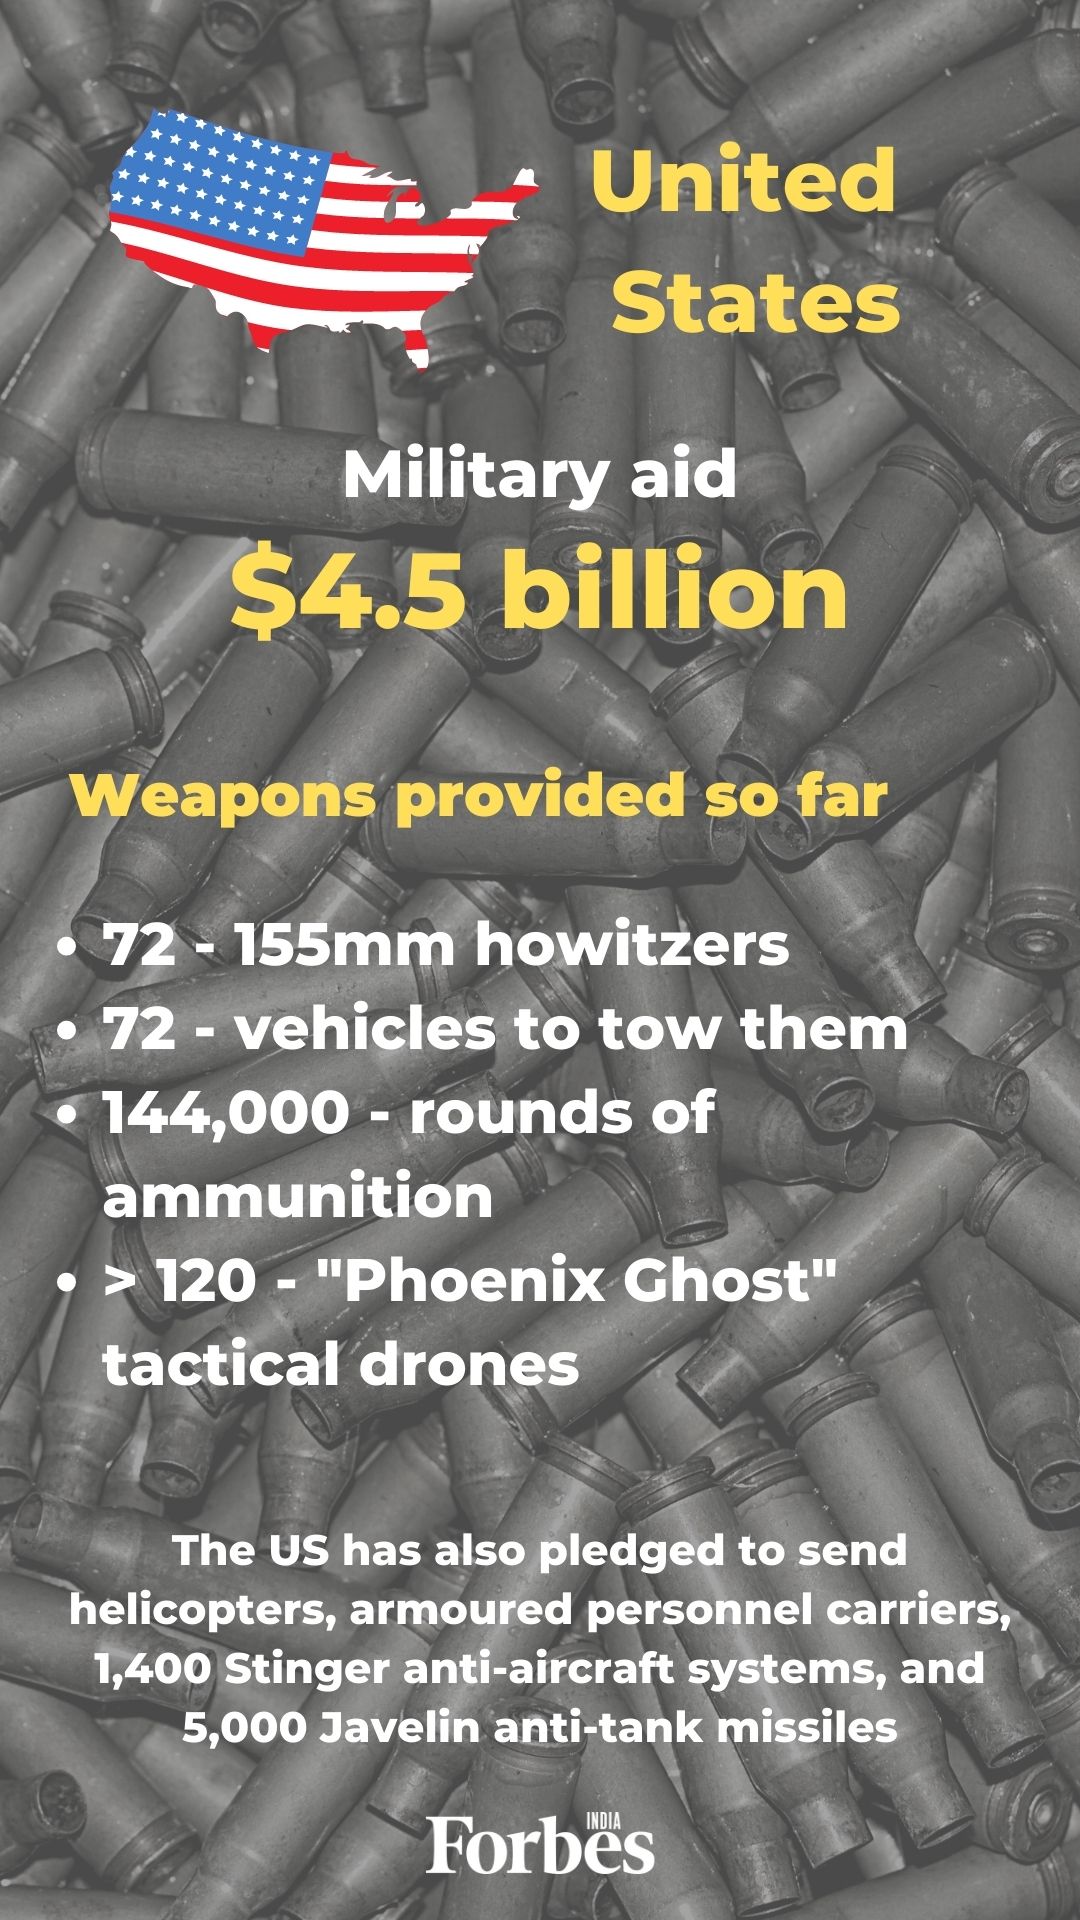 Military aid for Ukraine: Who has sent what?